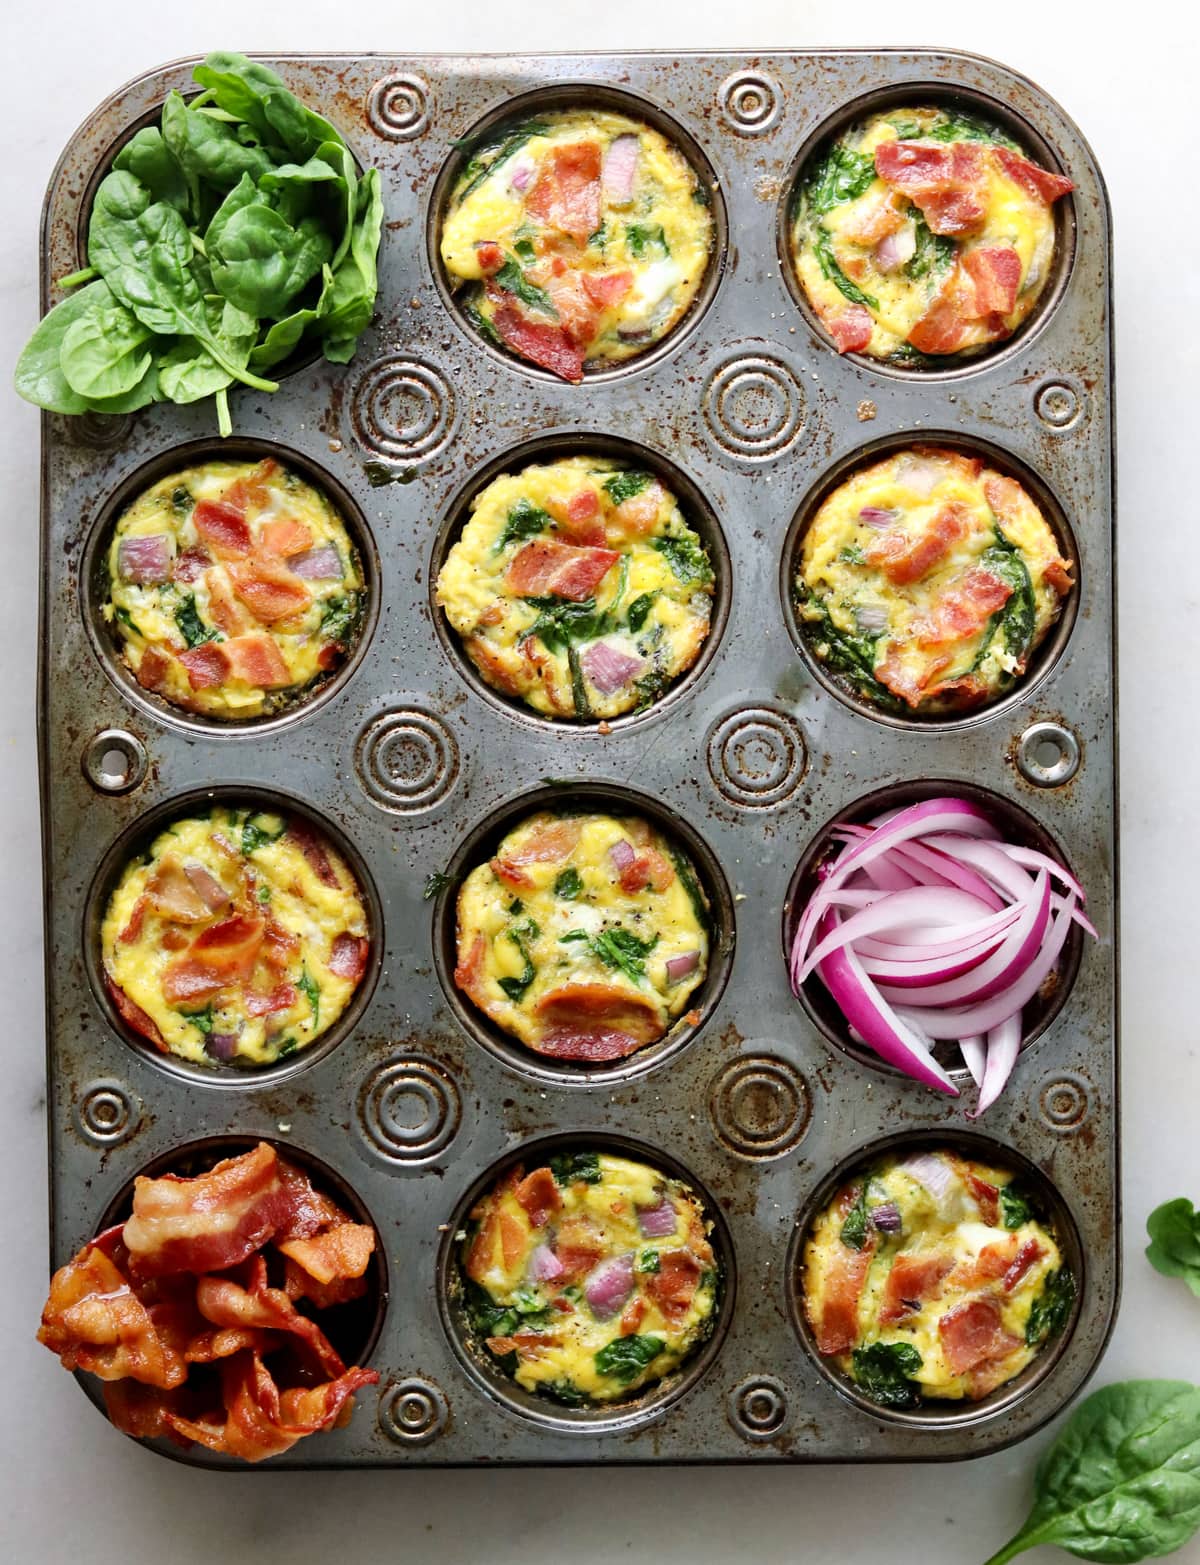 Bacon and Spinach Egg Muffins